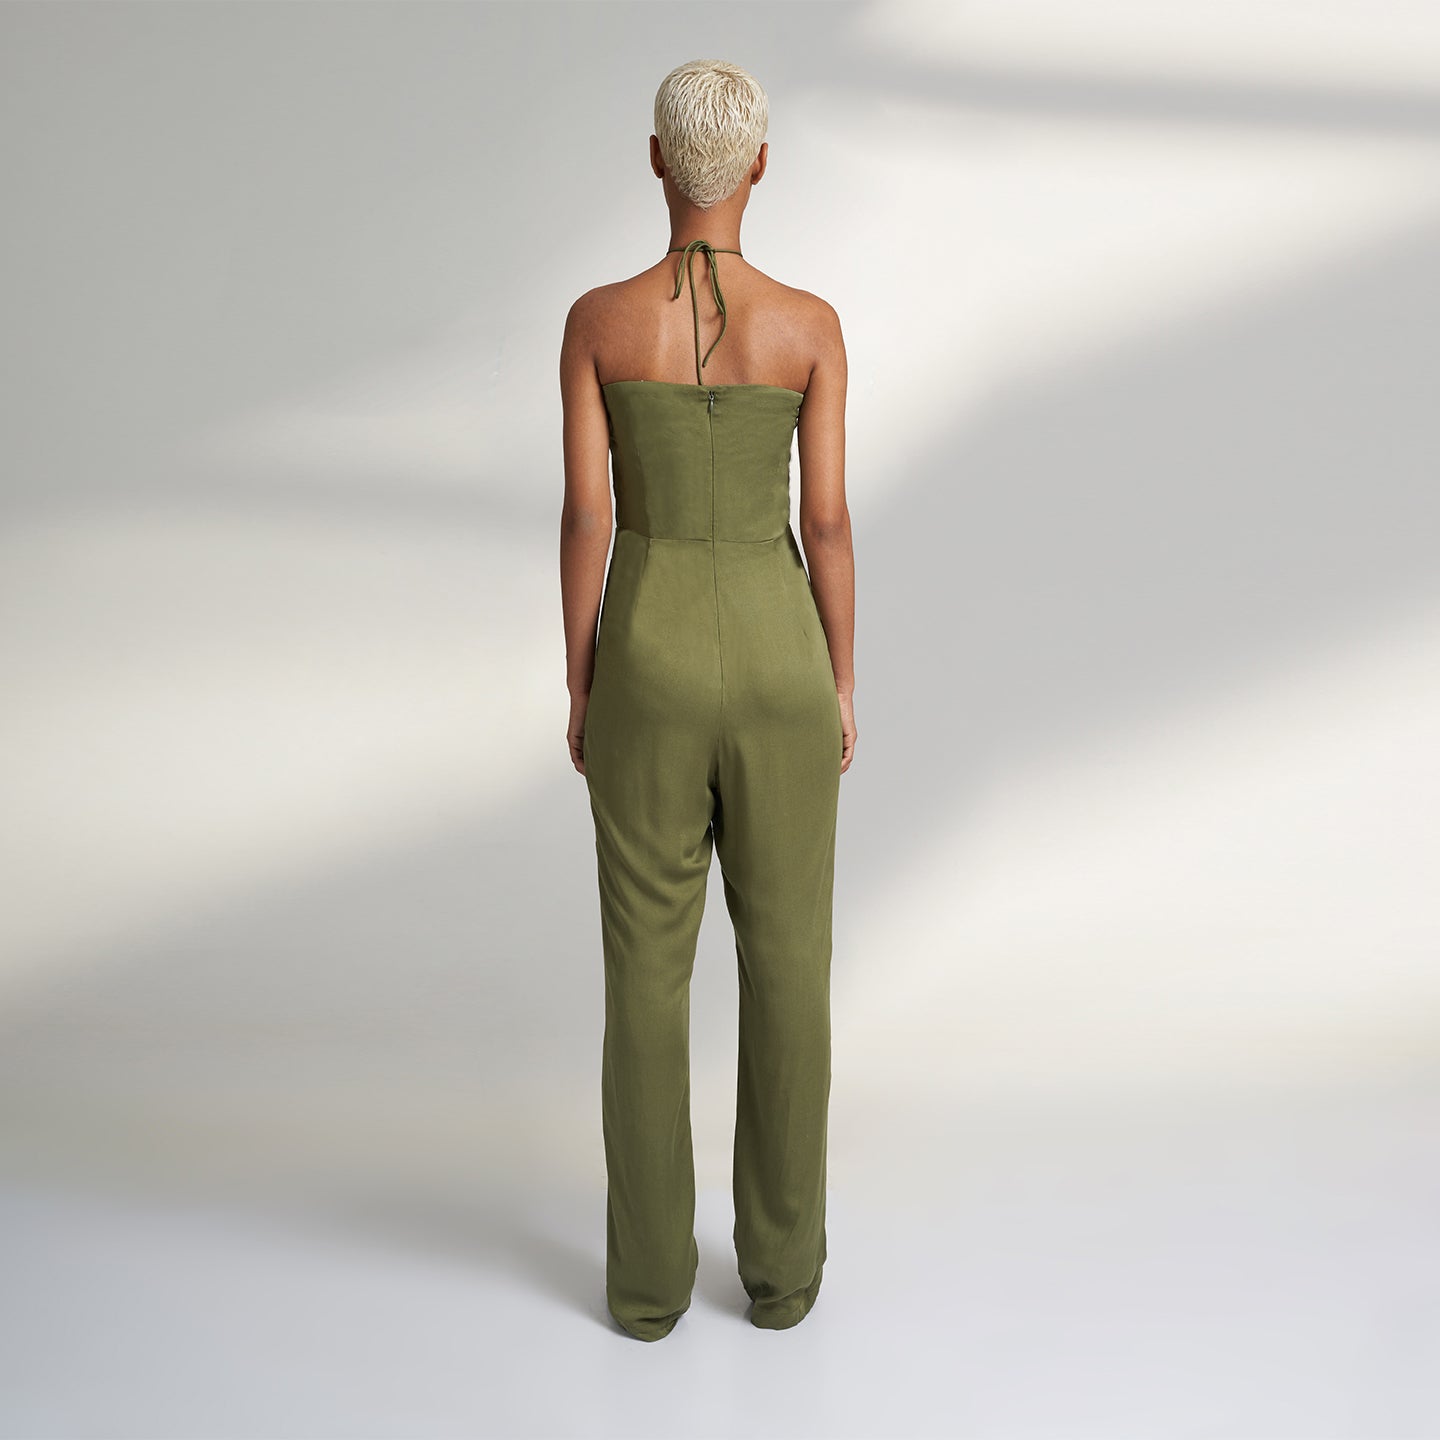 A global small size model wearing a solid olive green jumpsuit, highlighted with hand-stitched smocking on the bodice panel with a drawstring attached to the bodice to tie at the neck. inspired from the vintage window designs.